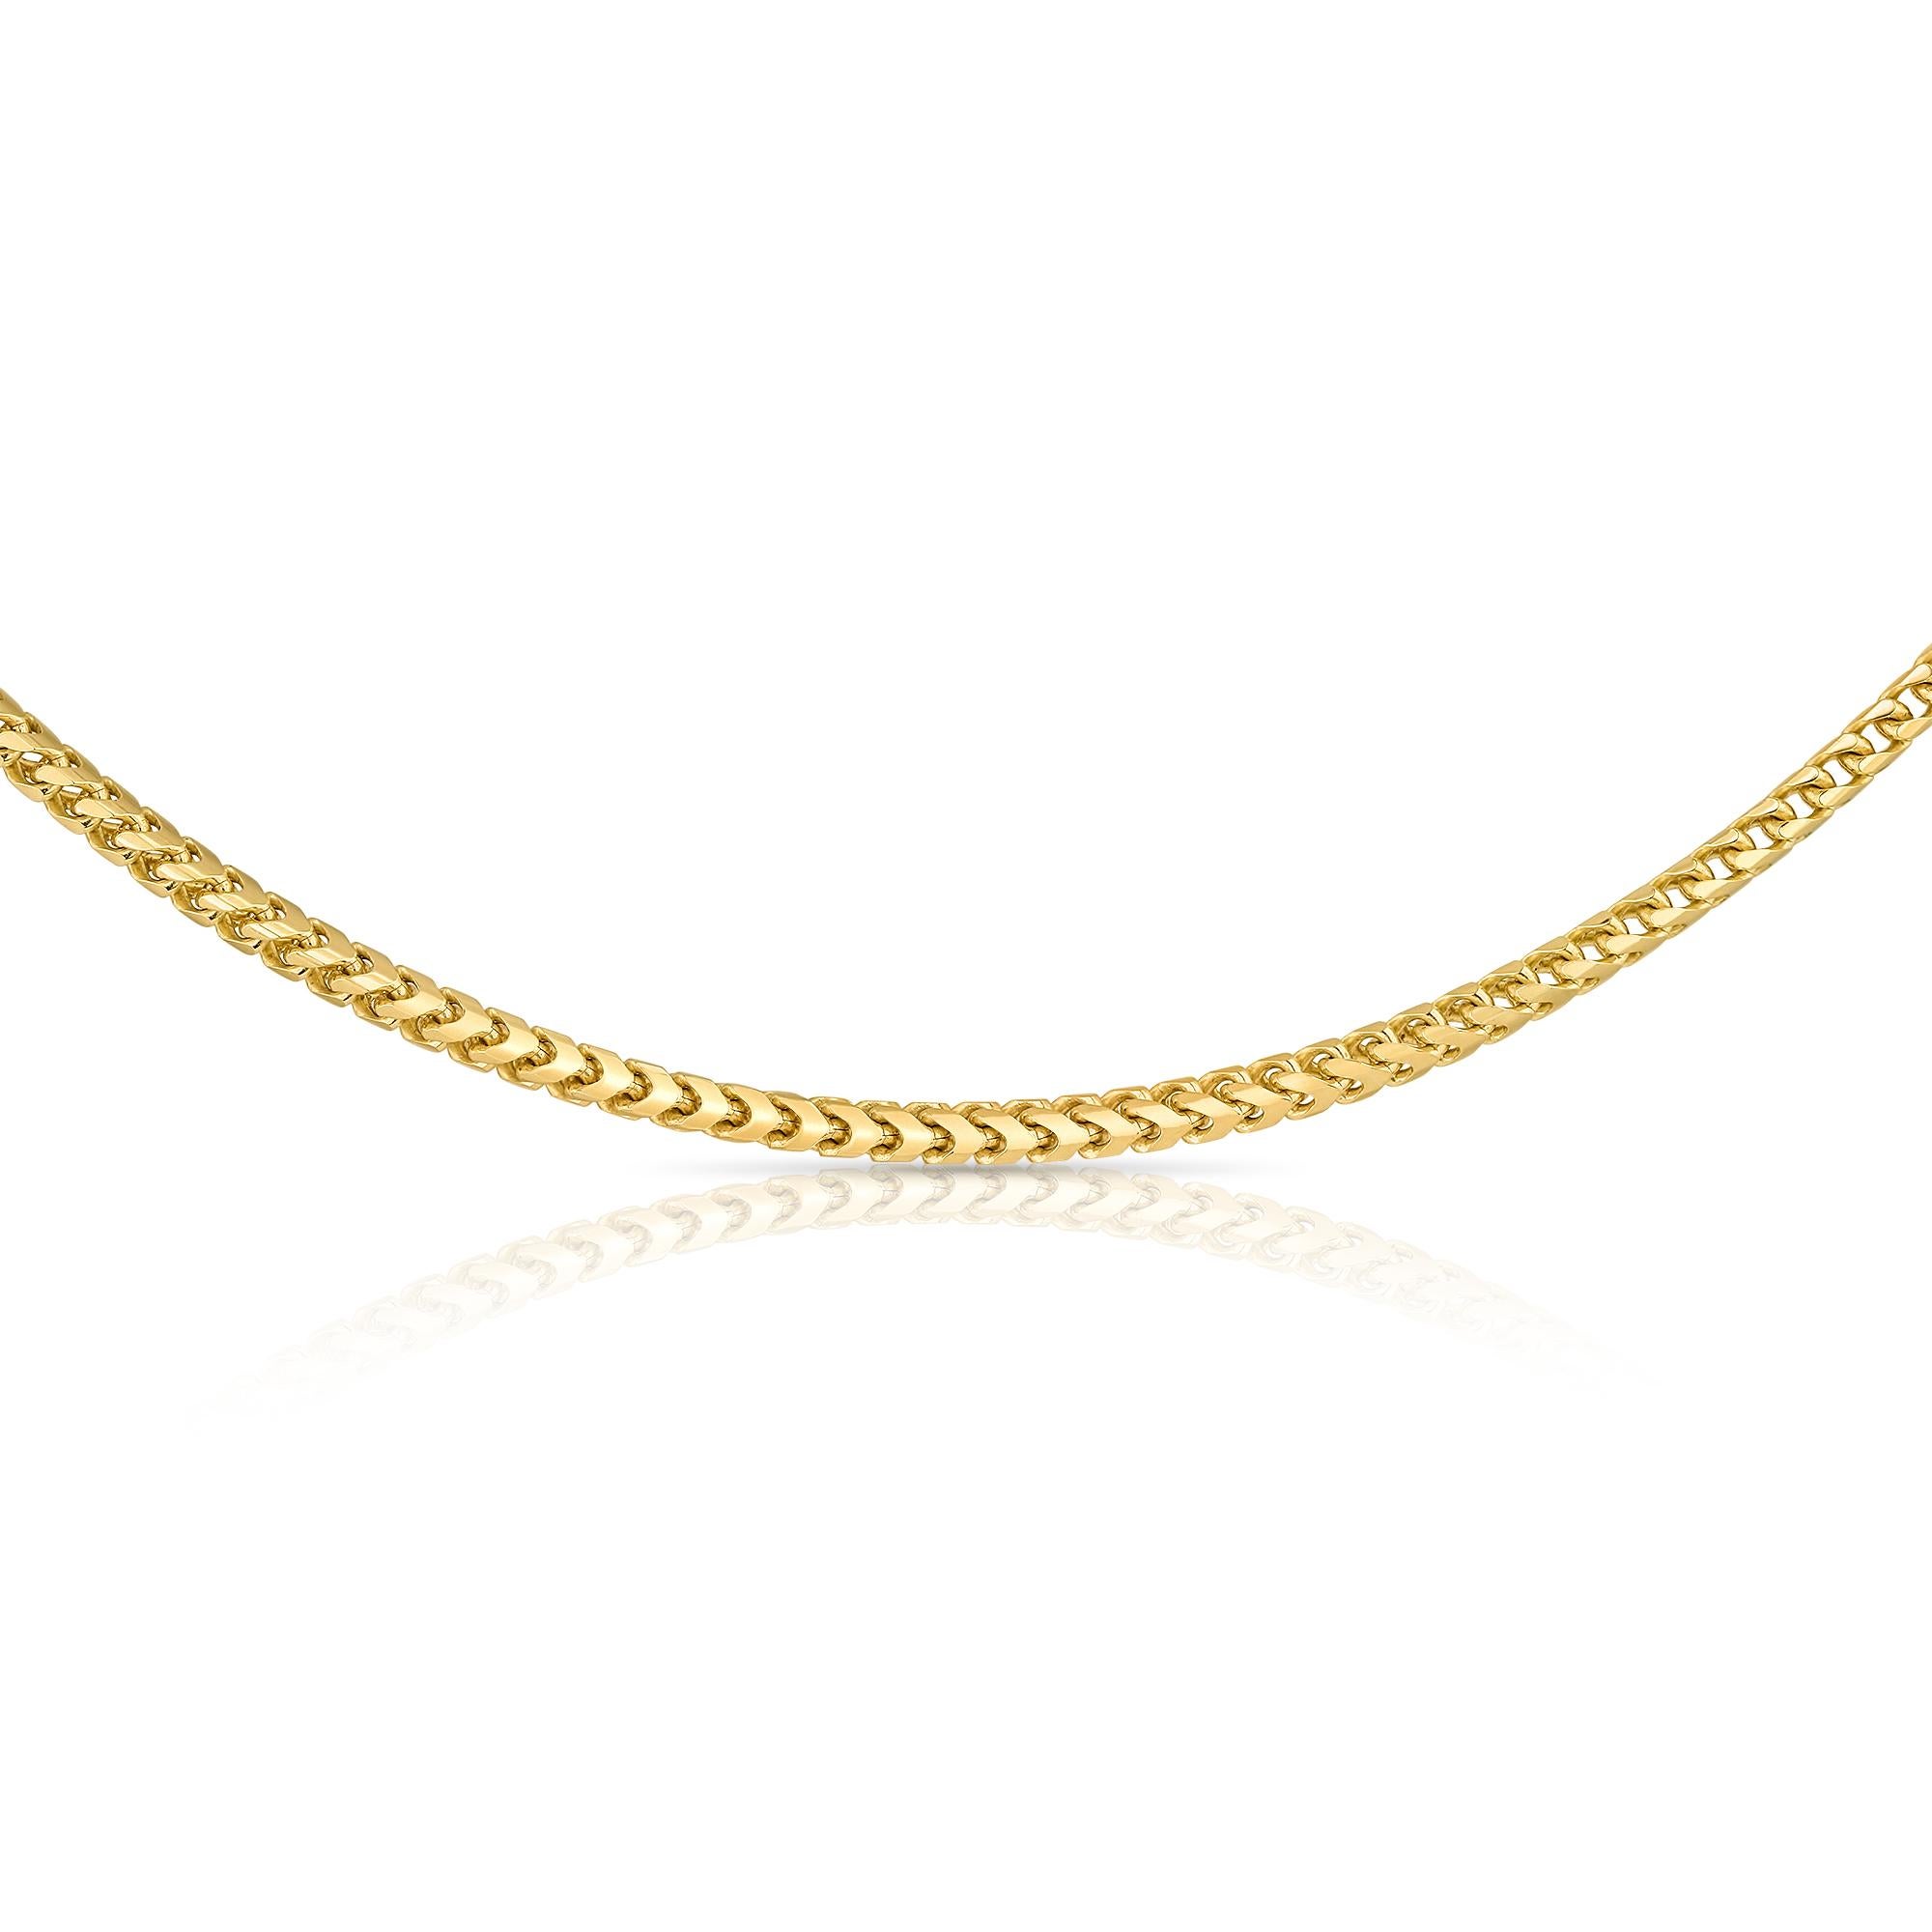 14 Karat Yellow Gold Thick Minimalist Rombo Chain Necklace 50cm -  Shlomit Rogel

A thick 14k solid gold rombo chain necklace with lots of style, elegance and beauty. This modern chain may be minimalist in its style but it has a striking presence,